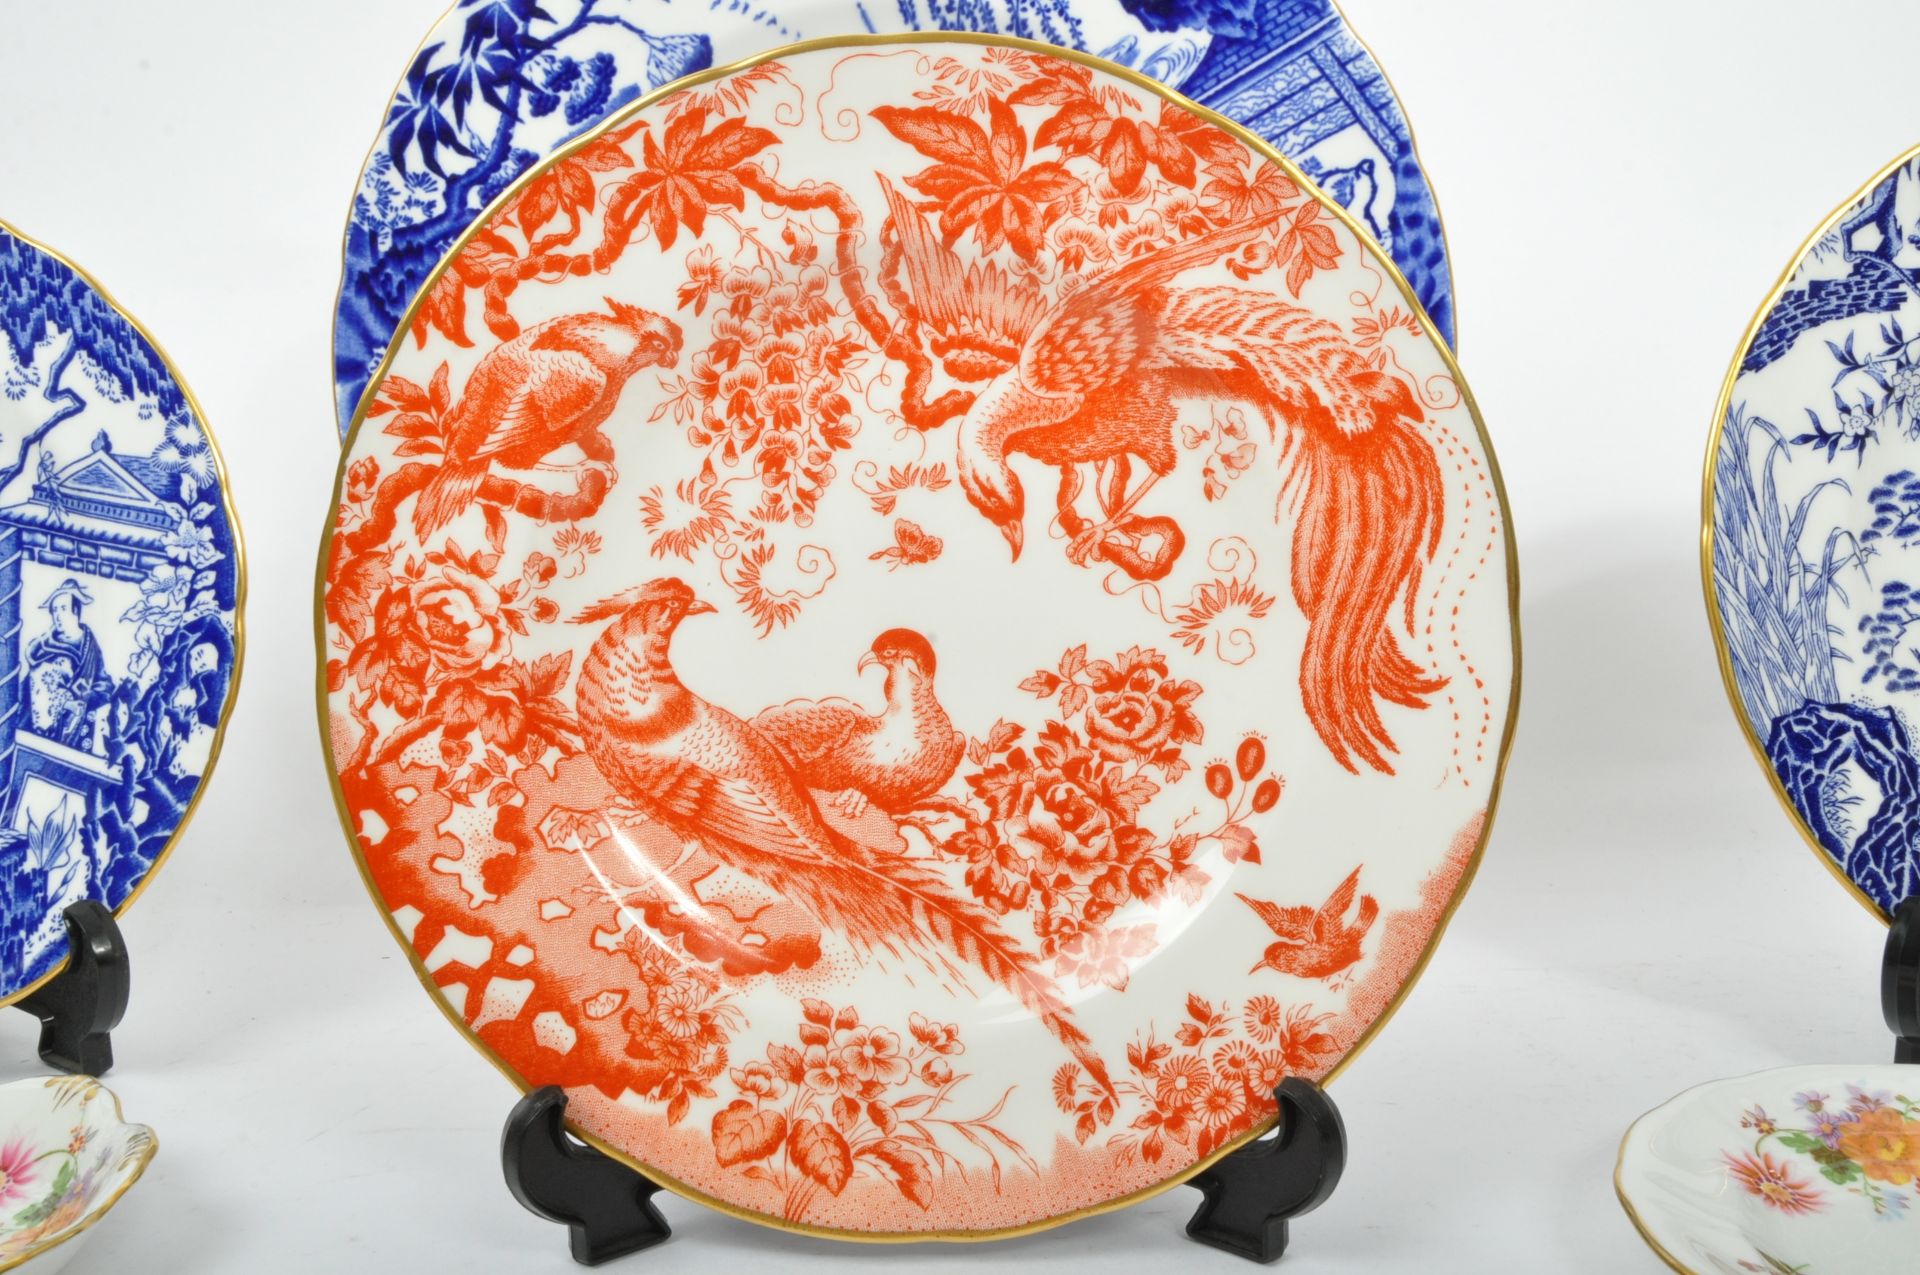 ROYAL CROWN DERBY - COLLECTION OF CHINA DISPLAY PLATES - Image 3 of 9